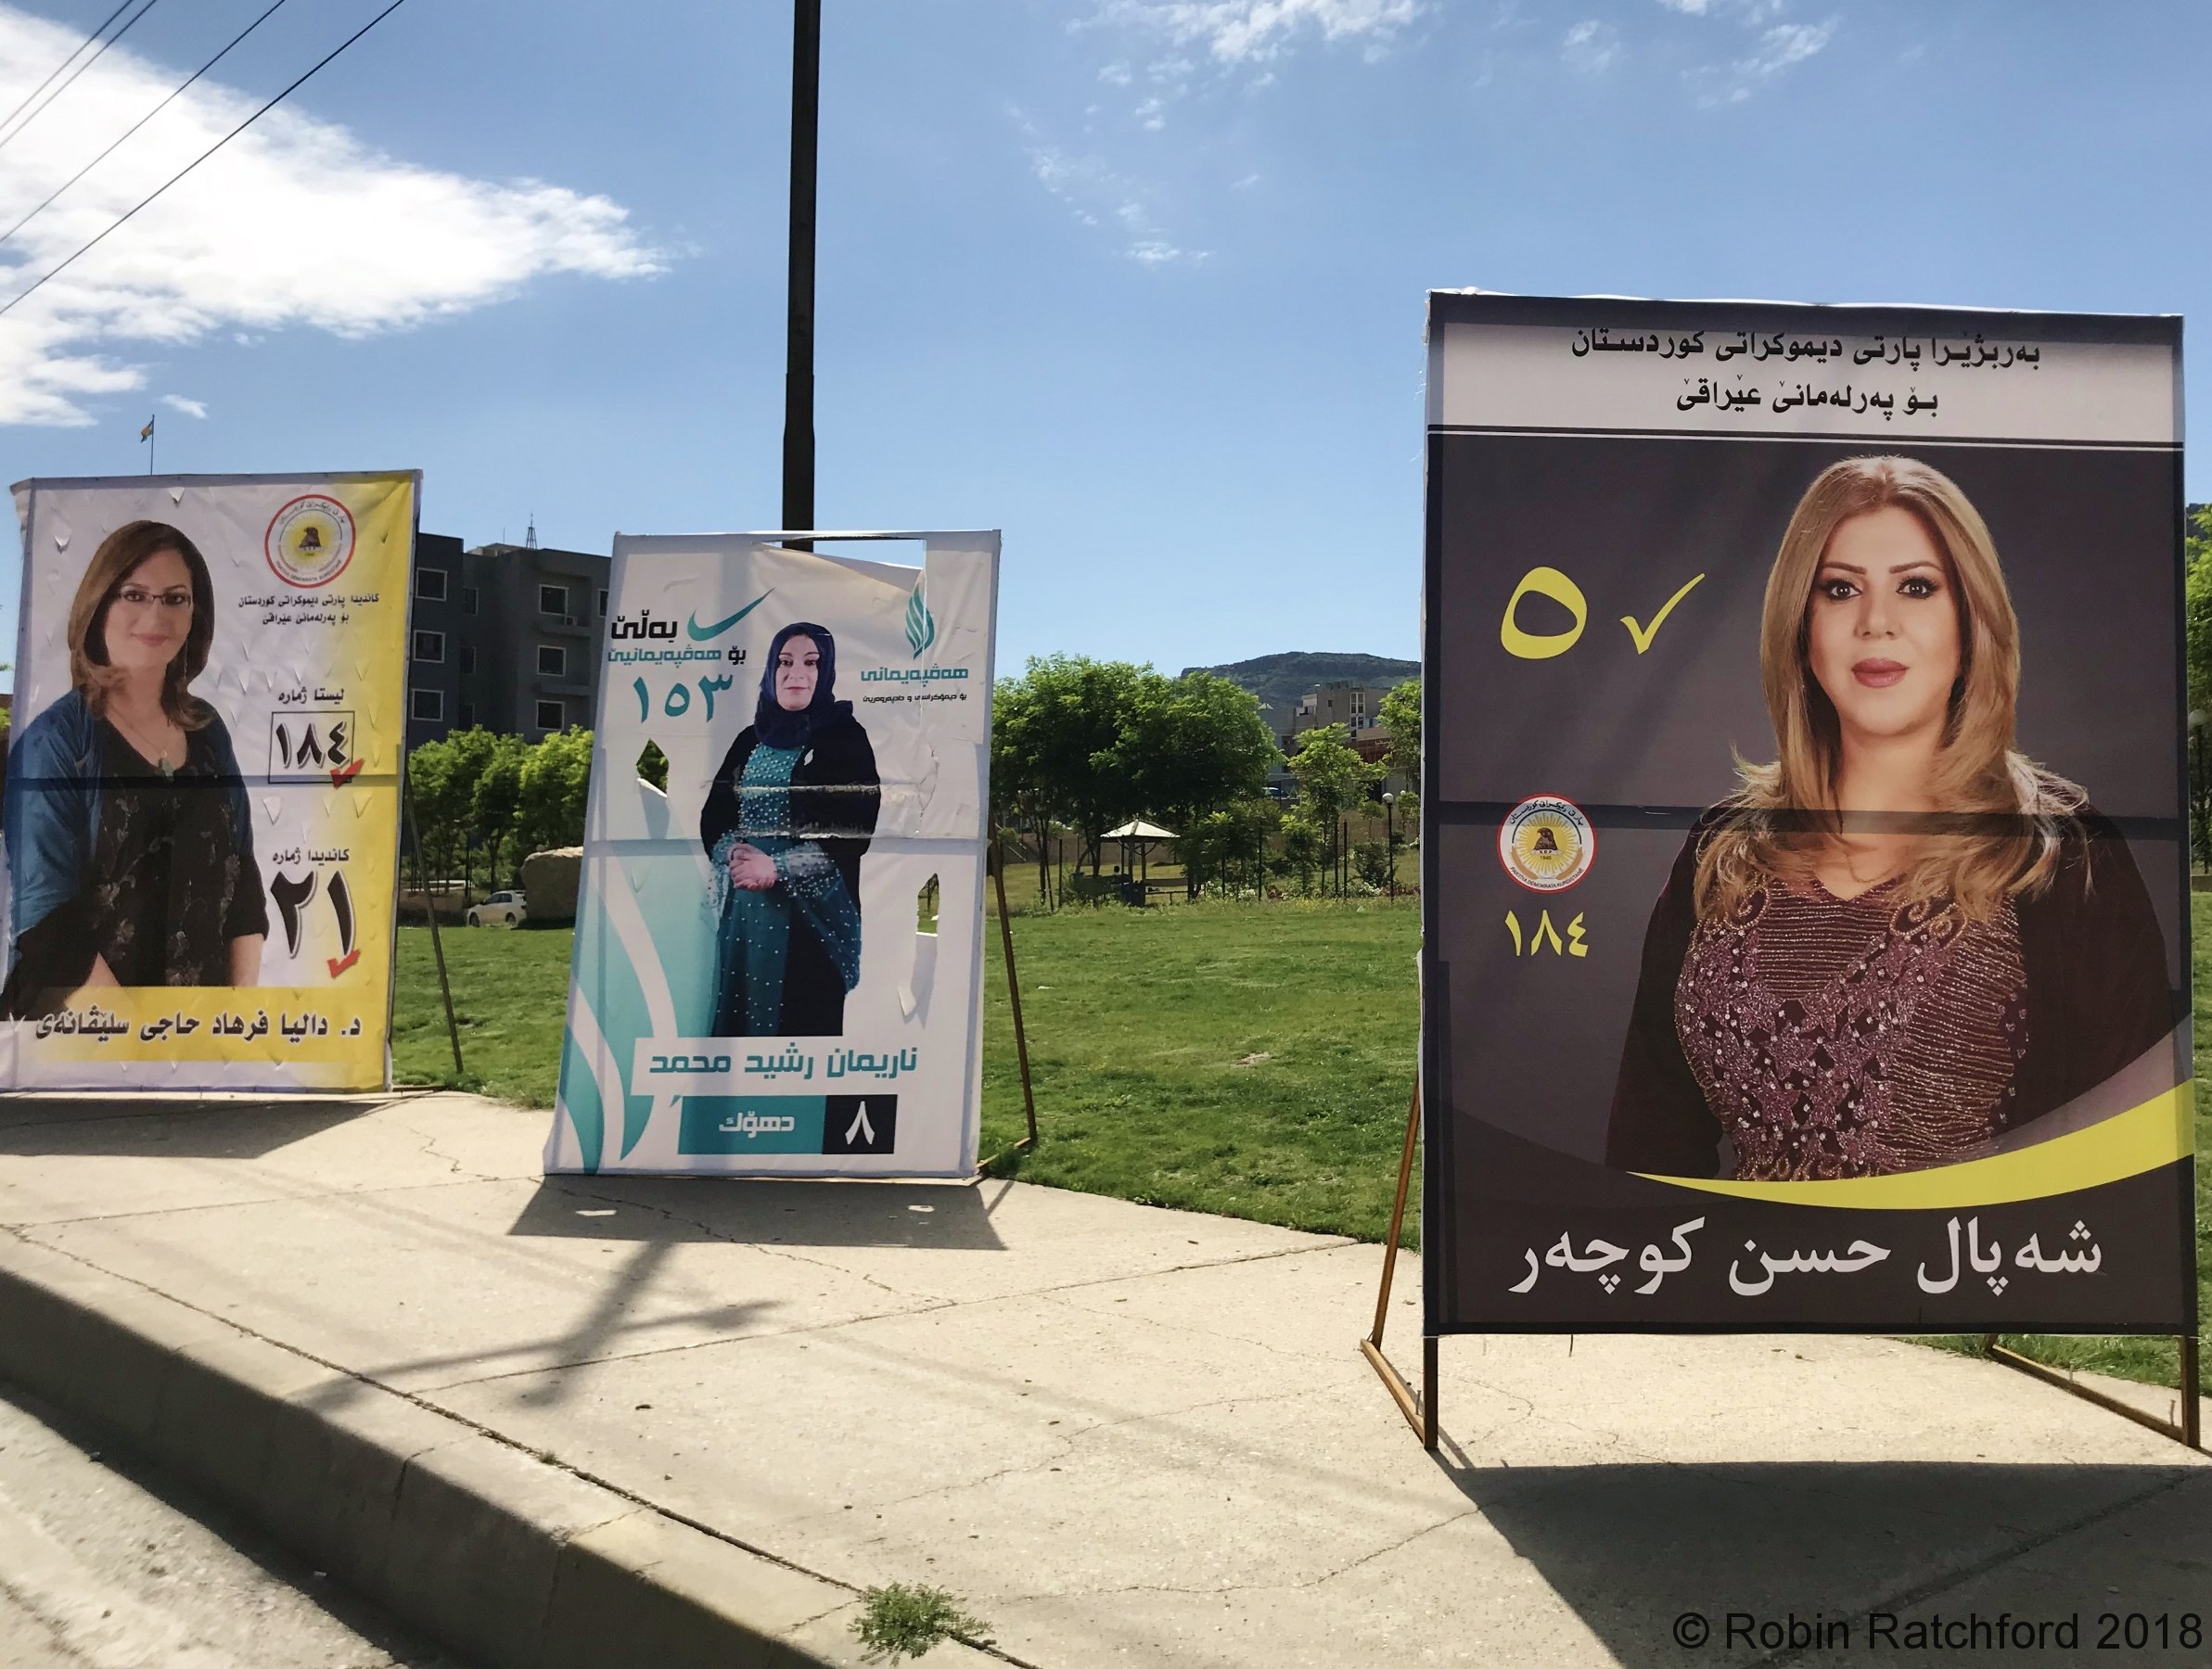 Election posters